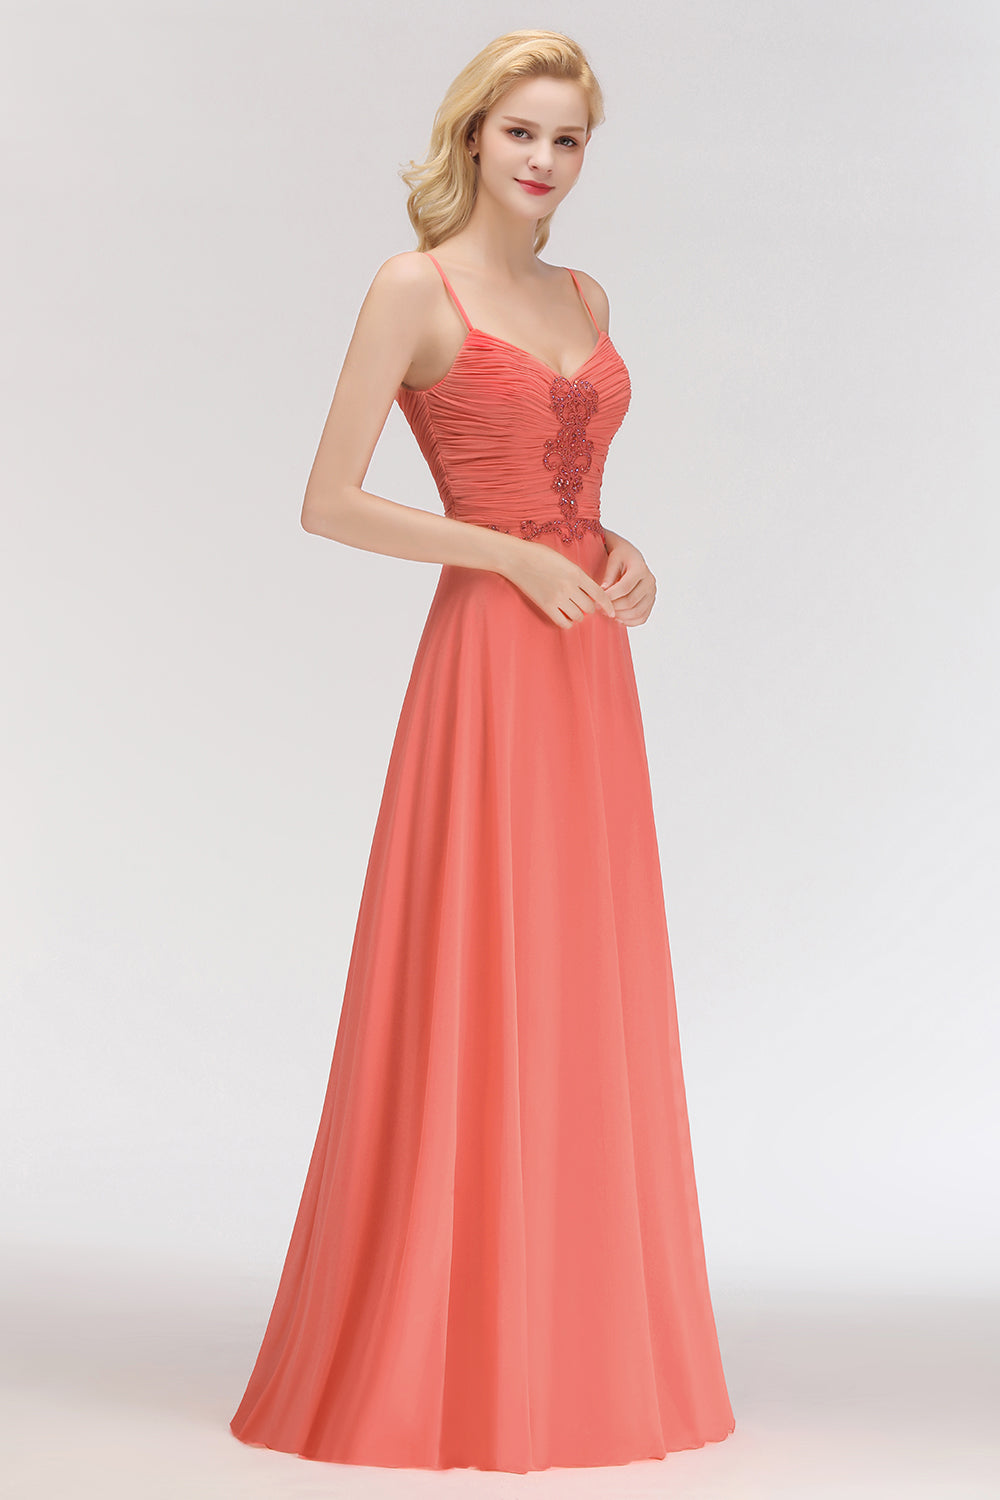 Modest Spaghetti-Straps Ruffle Affordable Bridesmaid Dress with Appliques-27dress